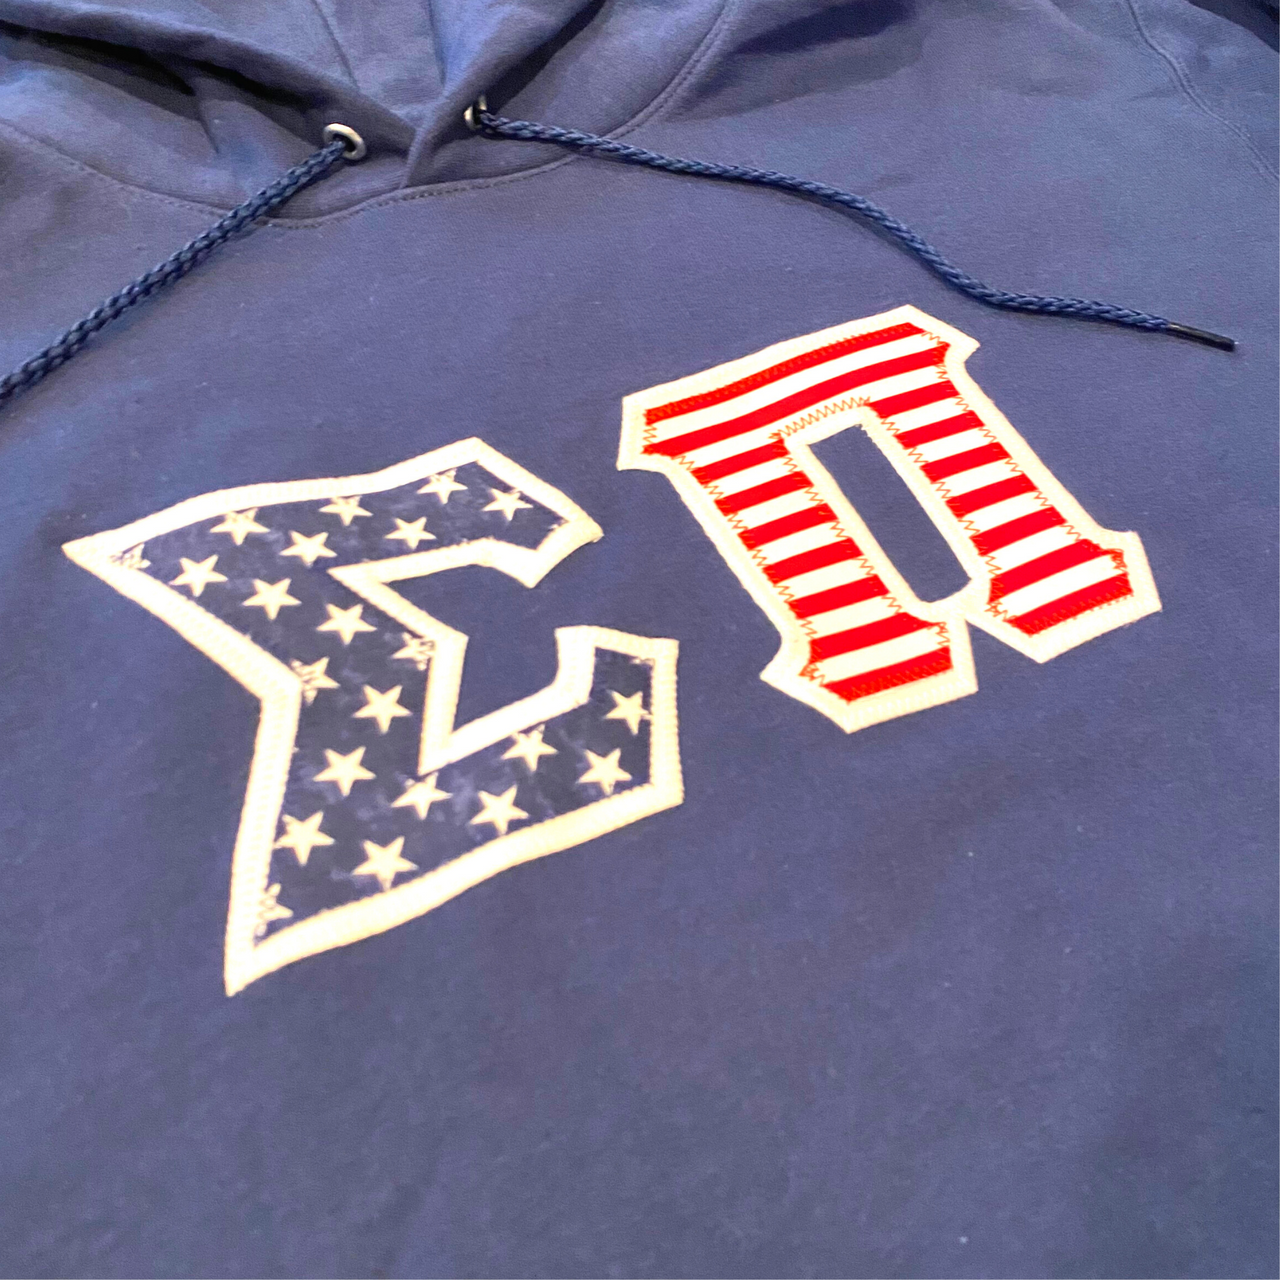 Sigma Pi Stitched Letter Hoodie | American Flag Pattern